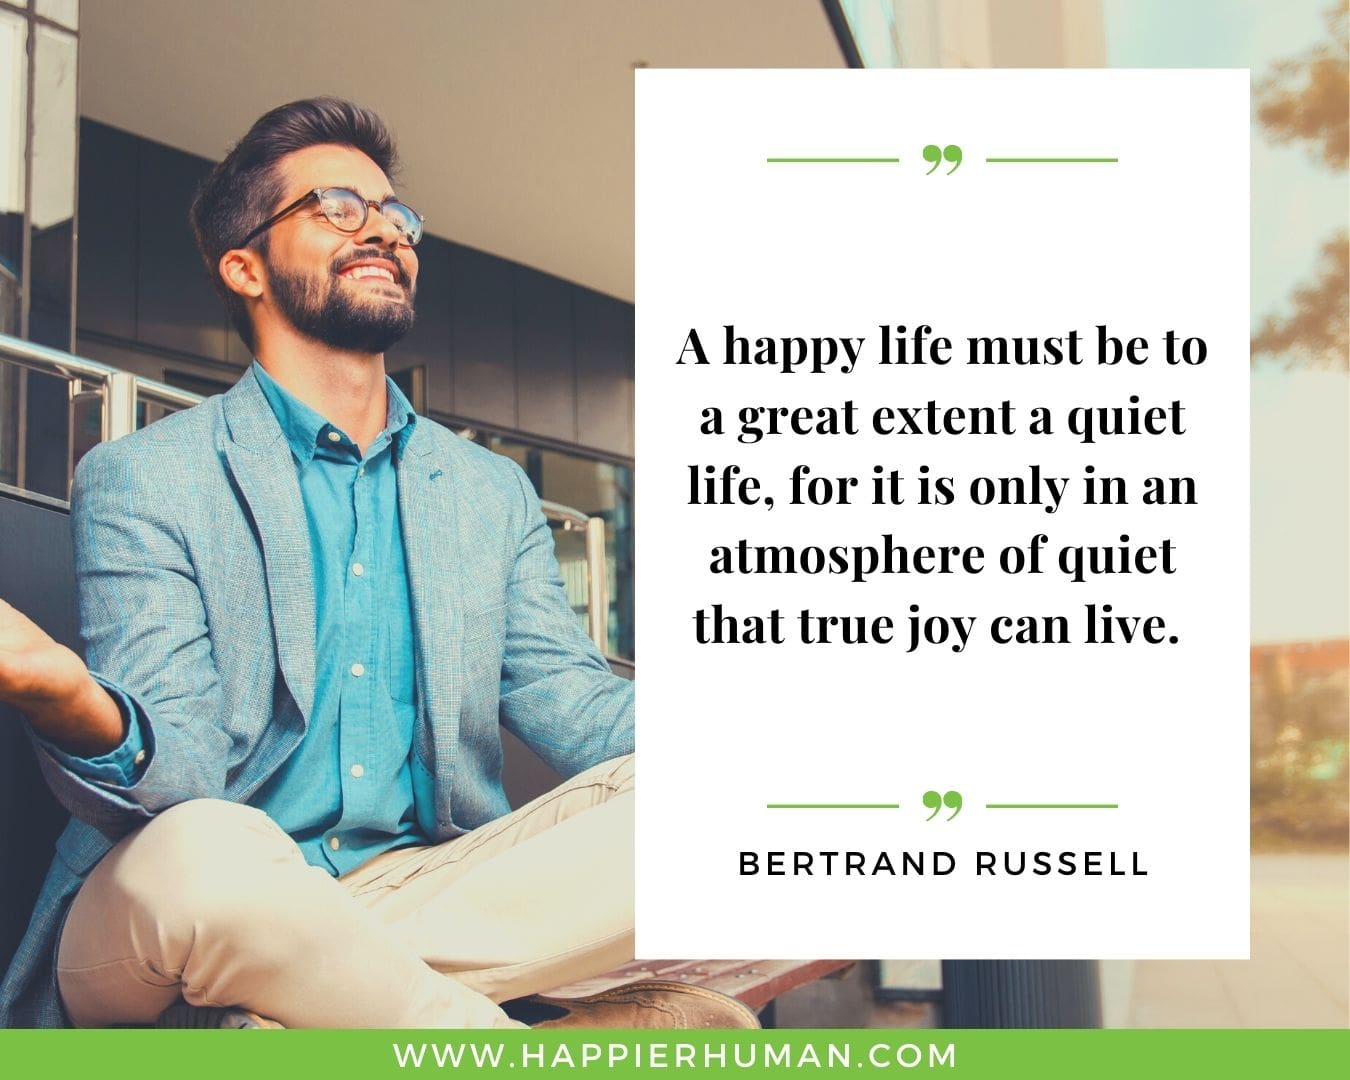 Loneliness Quotes - “A happy life must be to a great extent a quiet life, for it is only in an atmosphere of quiet that true joy can live.”– Bertrand Russell